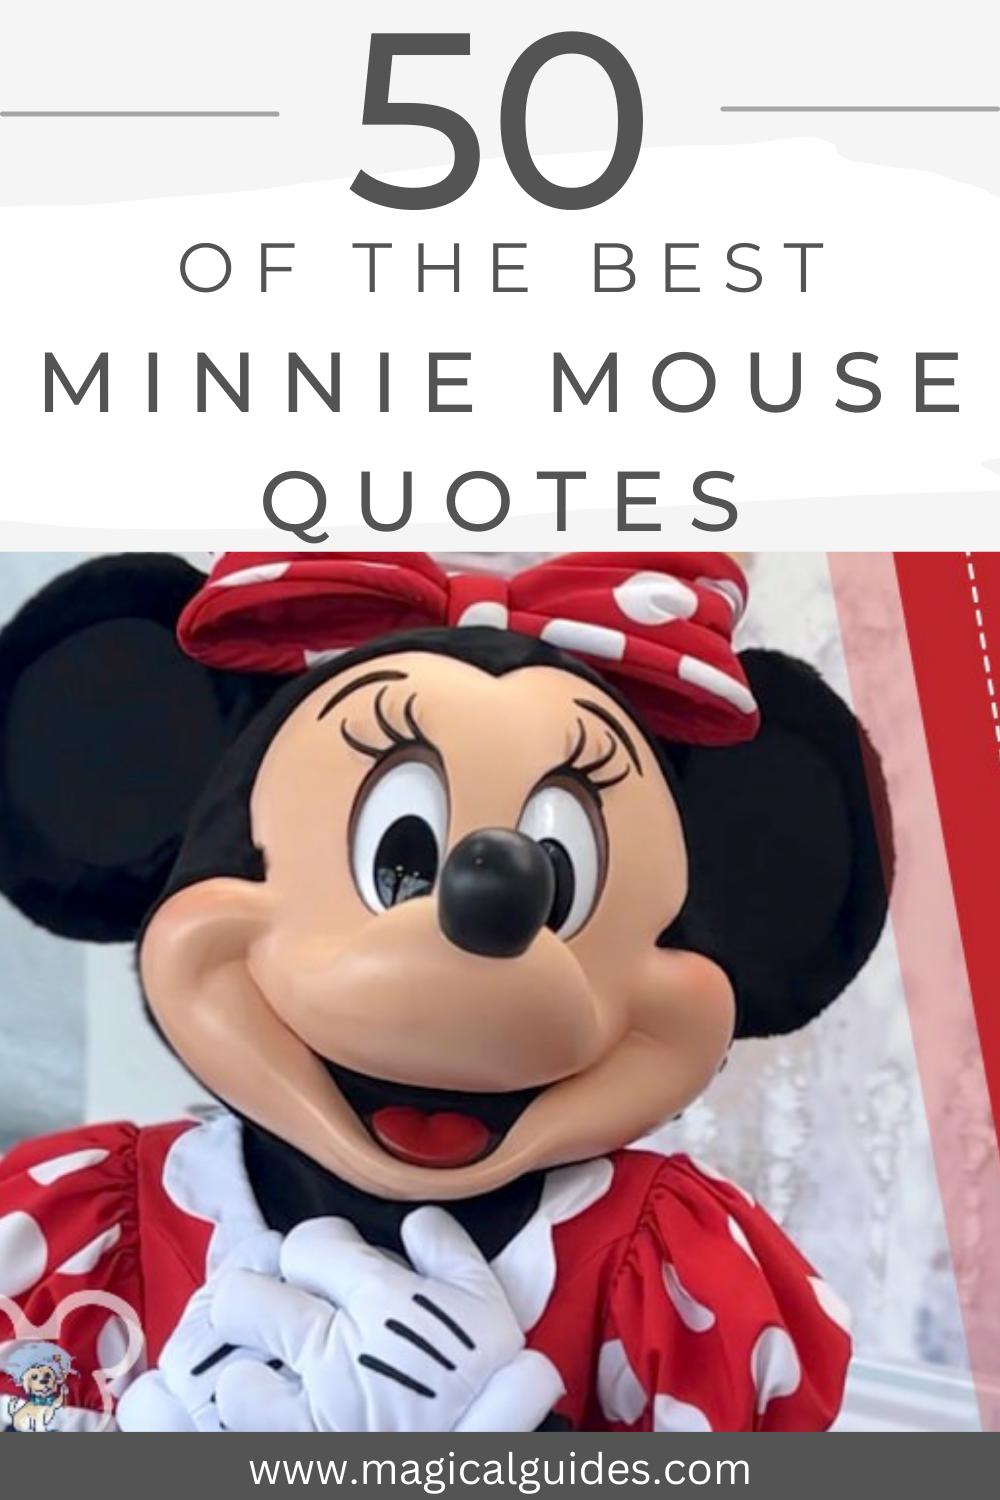 50 of the best Minnie Mouse Quotes. Minnie Mouse Quotes Love, Minnie Mouse Quotes Inspirational, and Cute Minnie Mouse Quotes for Minnie Mouse lovers.